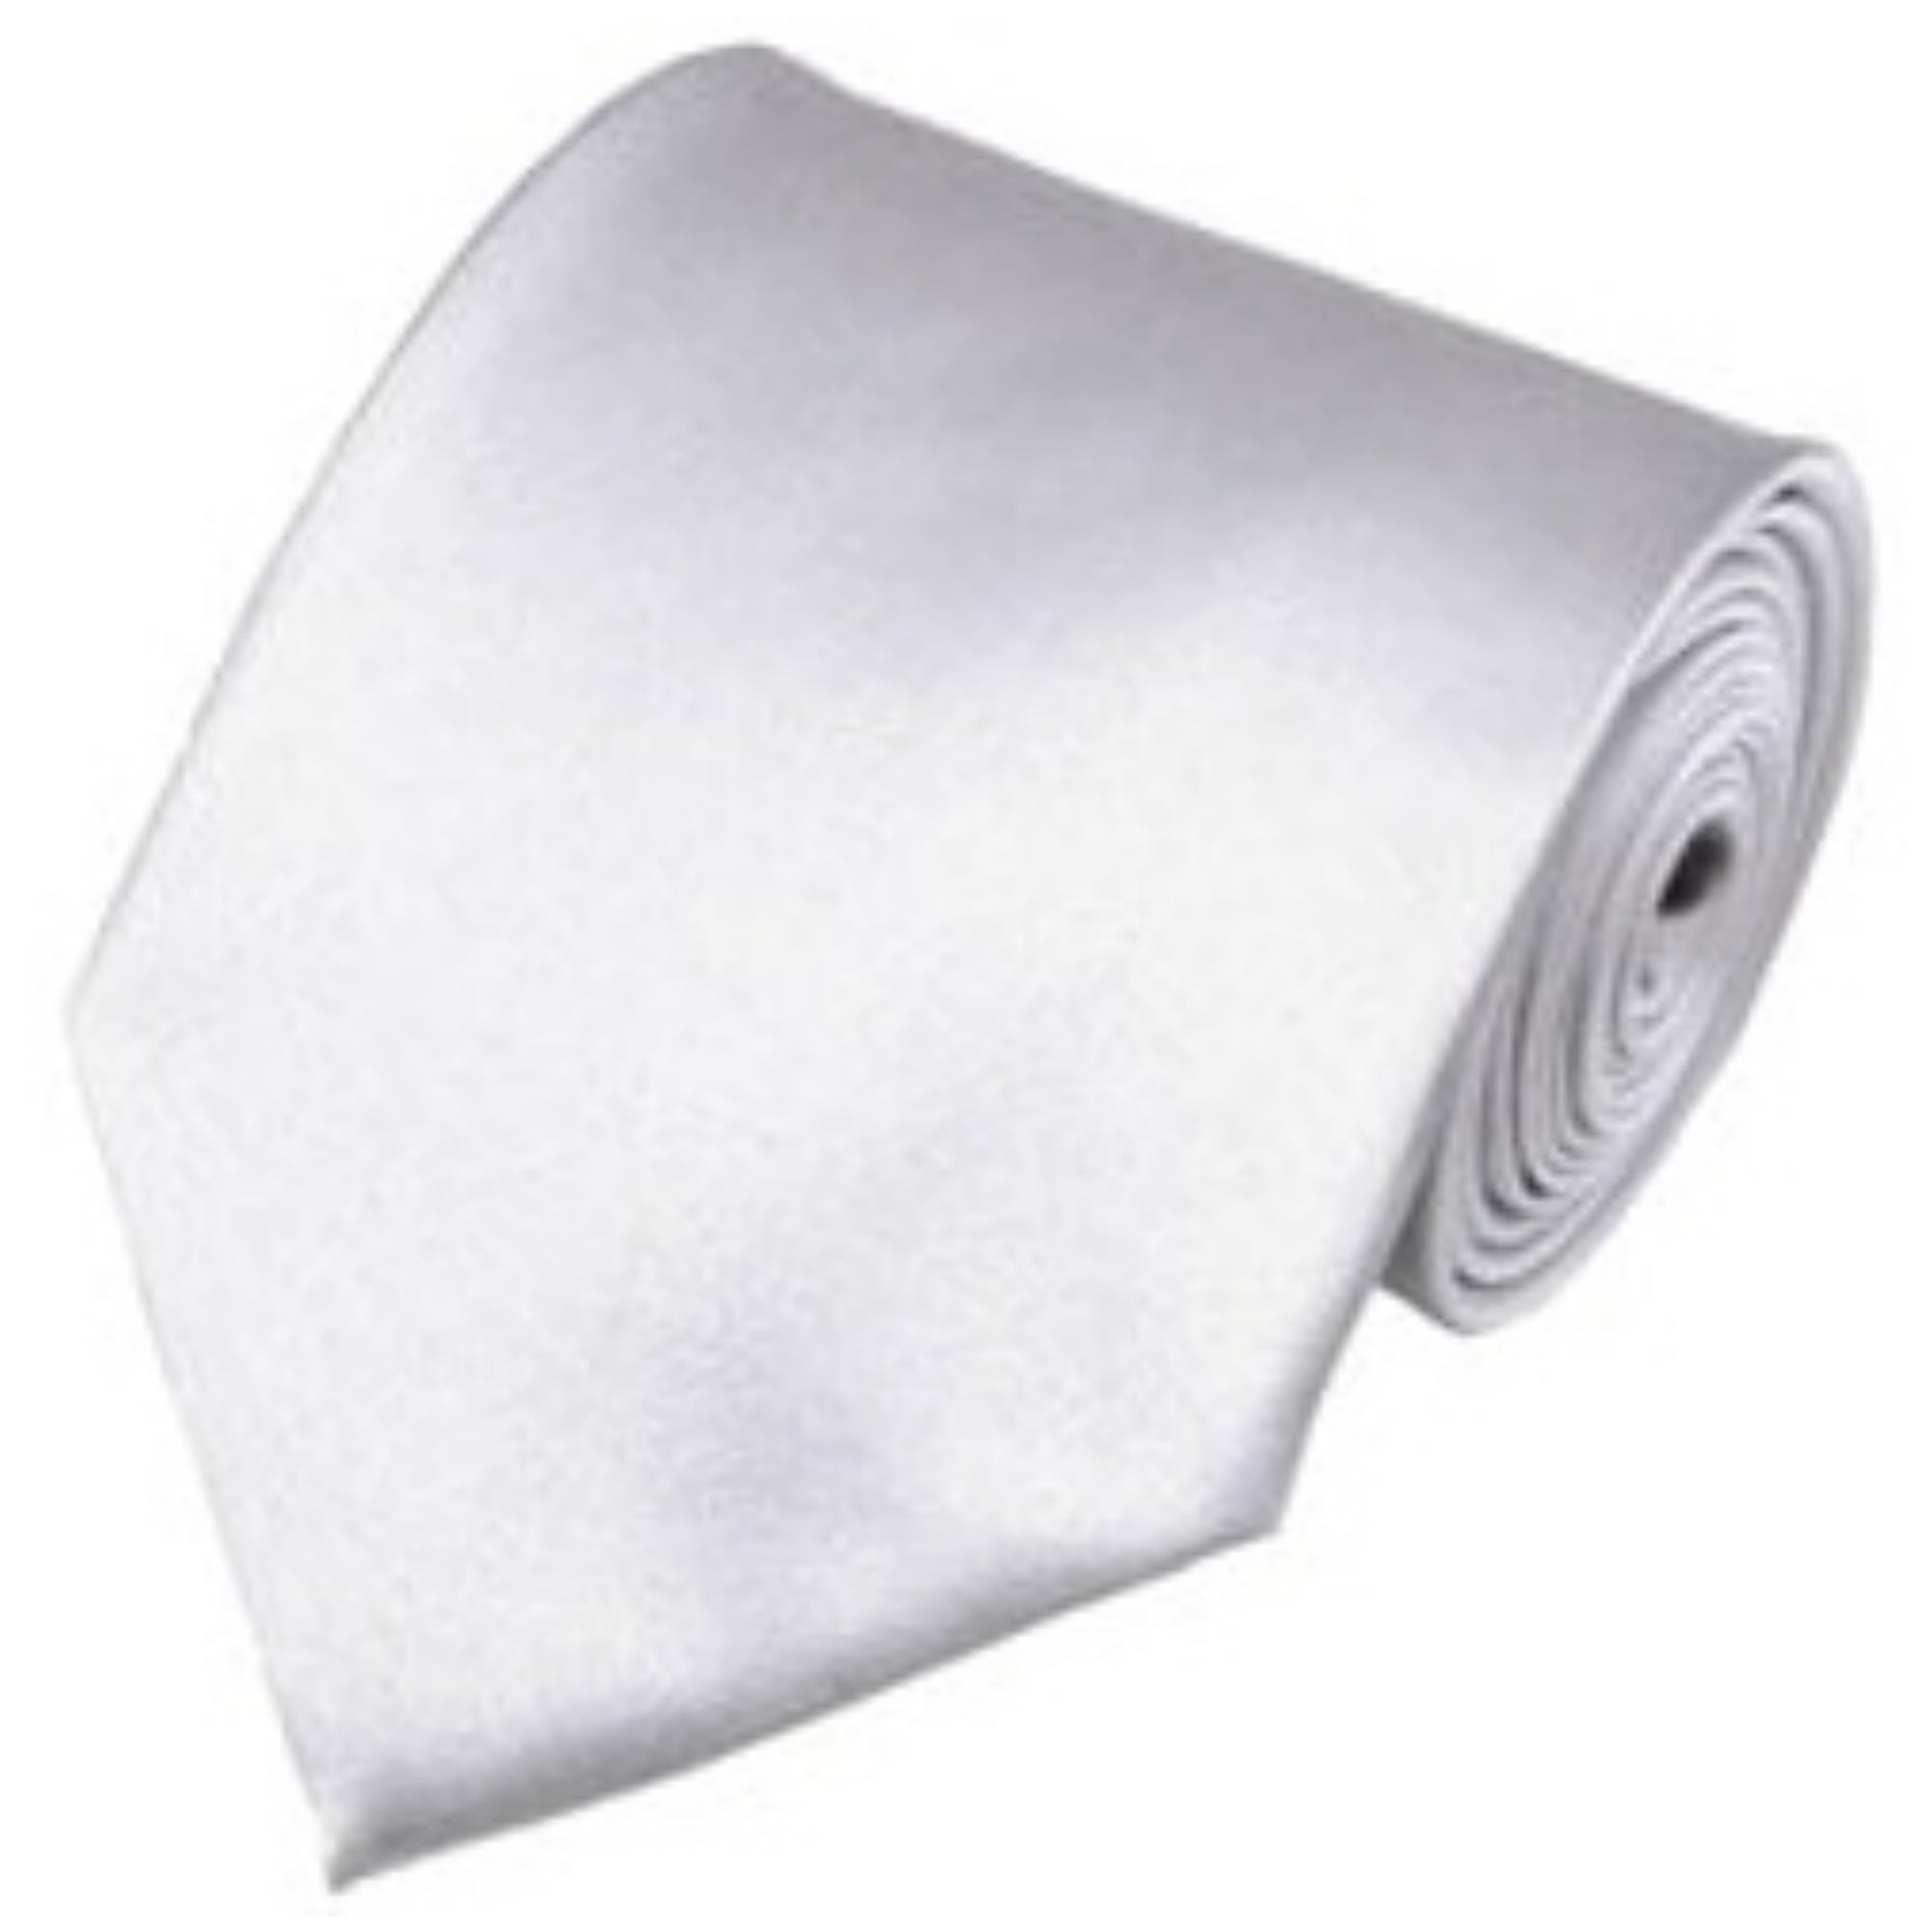 TheDapperTie Solid Color 3.5 Inch Wide And 62 Inch Extra Long Necktie For Big & Tall Men Neck Tie TheDapperTie White  